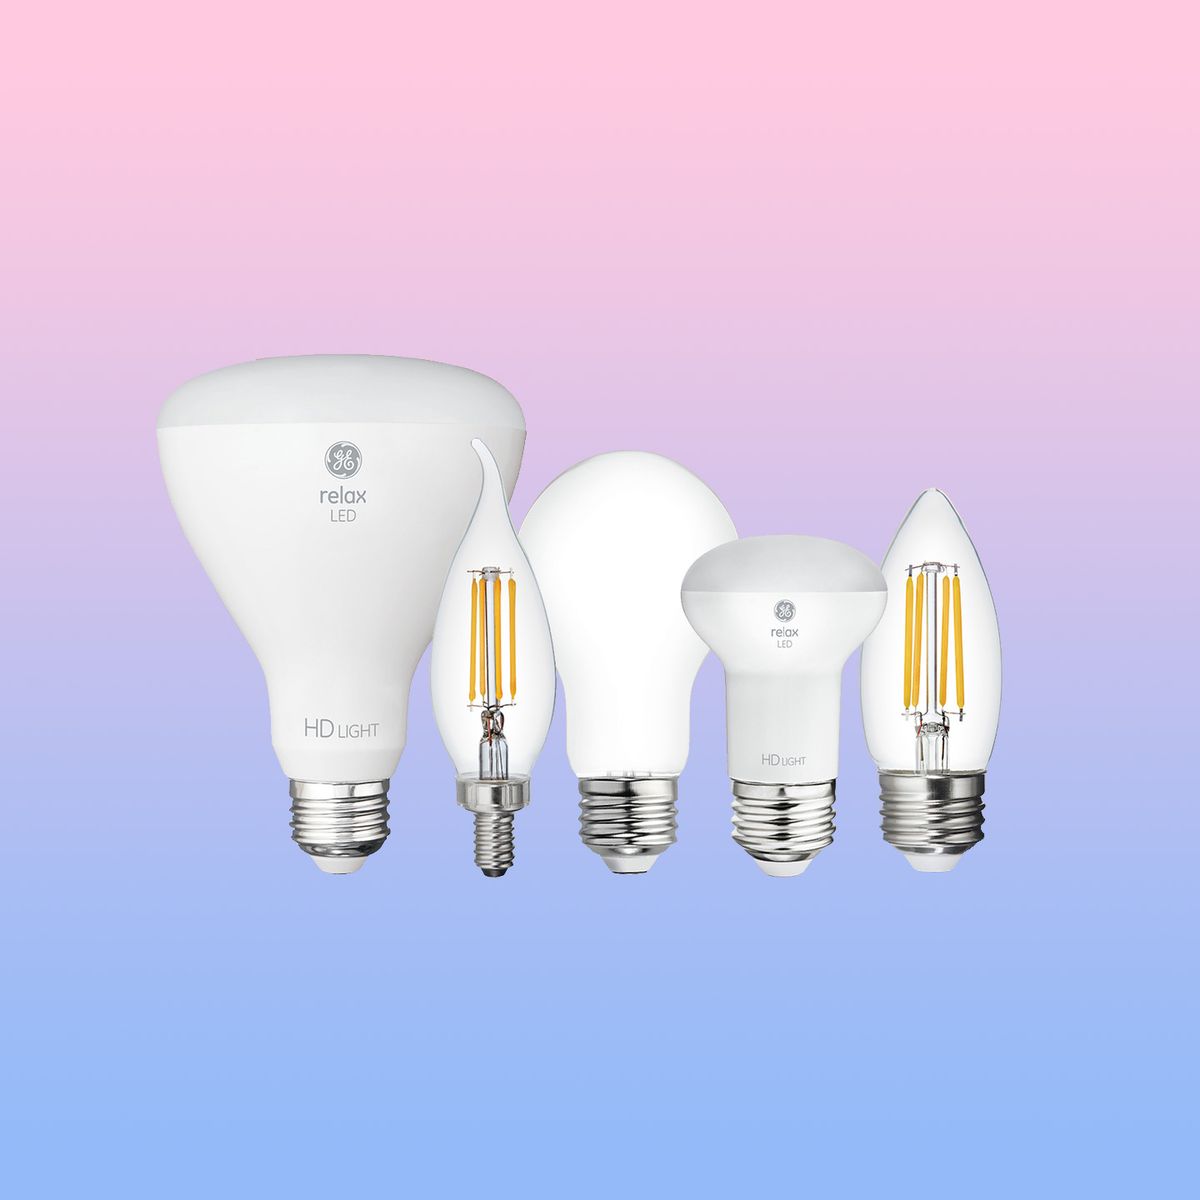 I'm Obsessed These Bulbs - GE Relax LED Bulbs Review